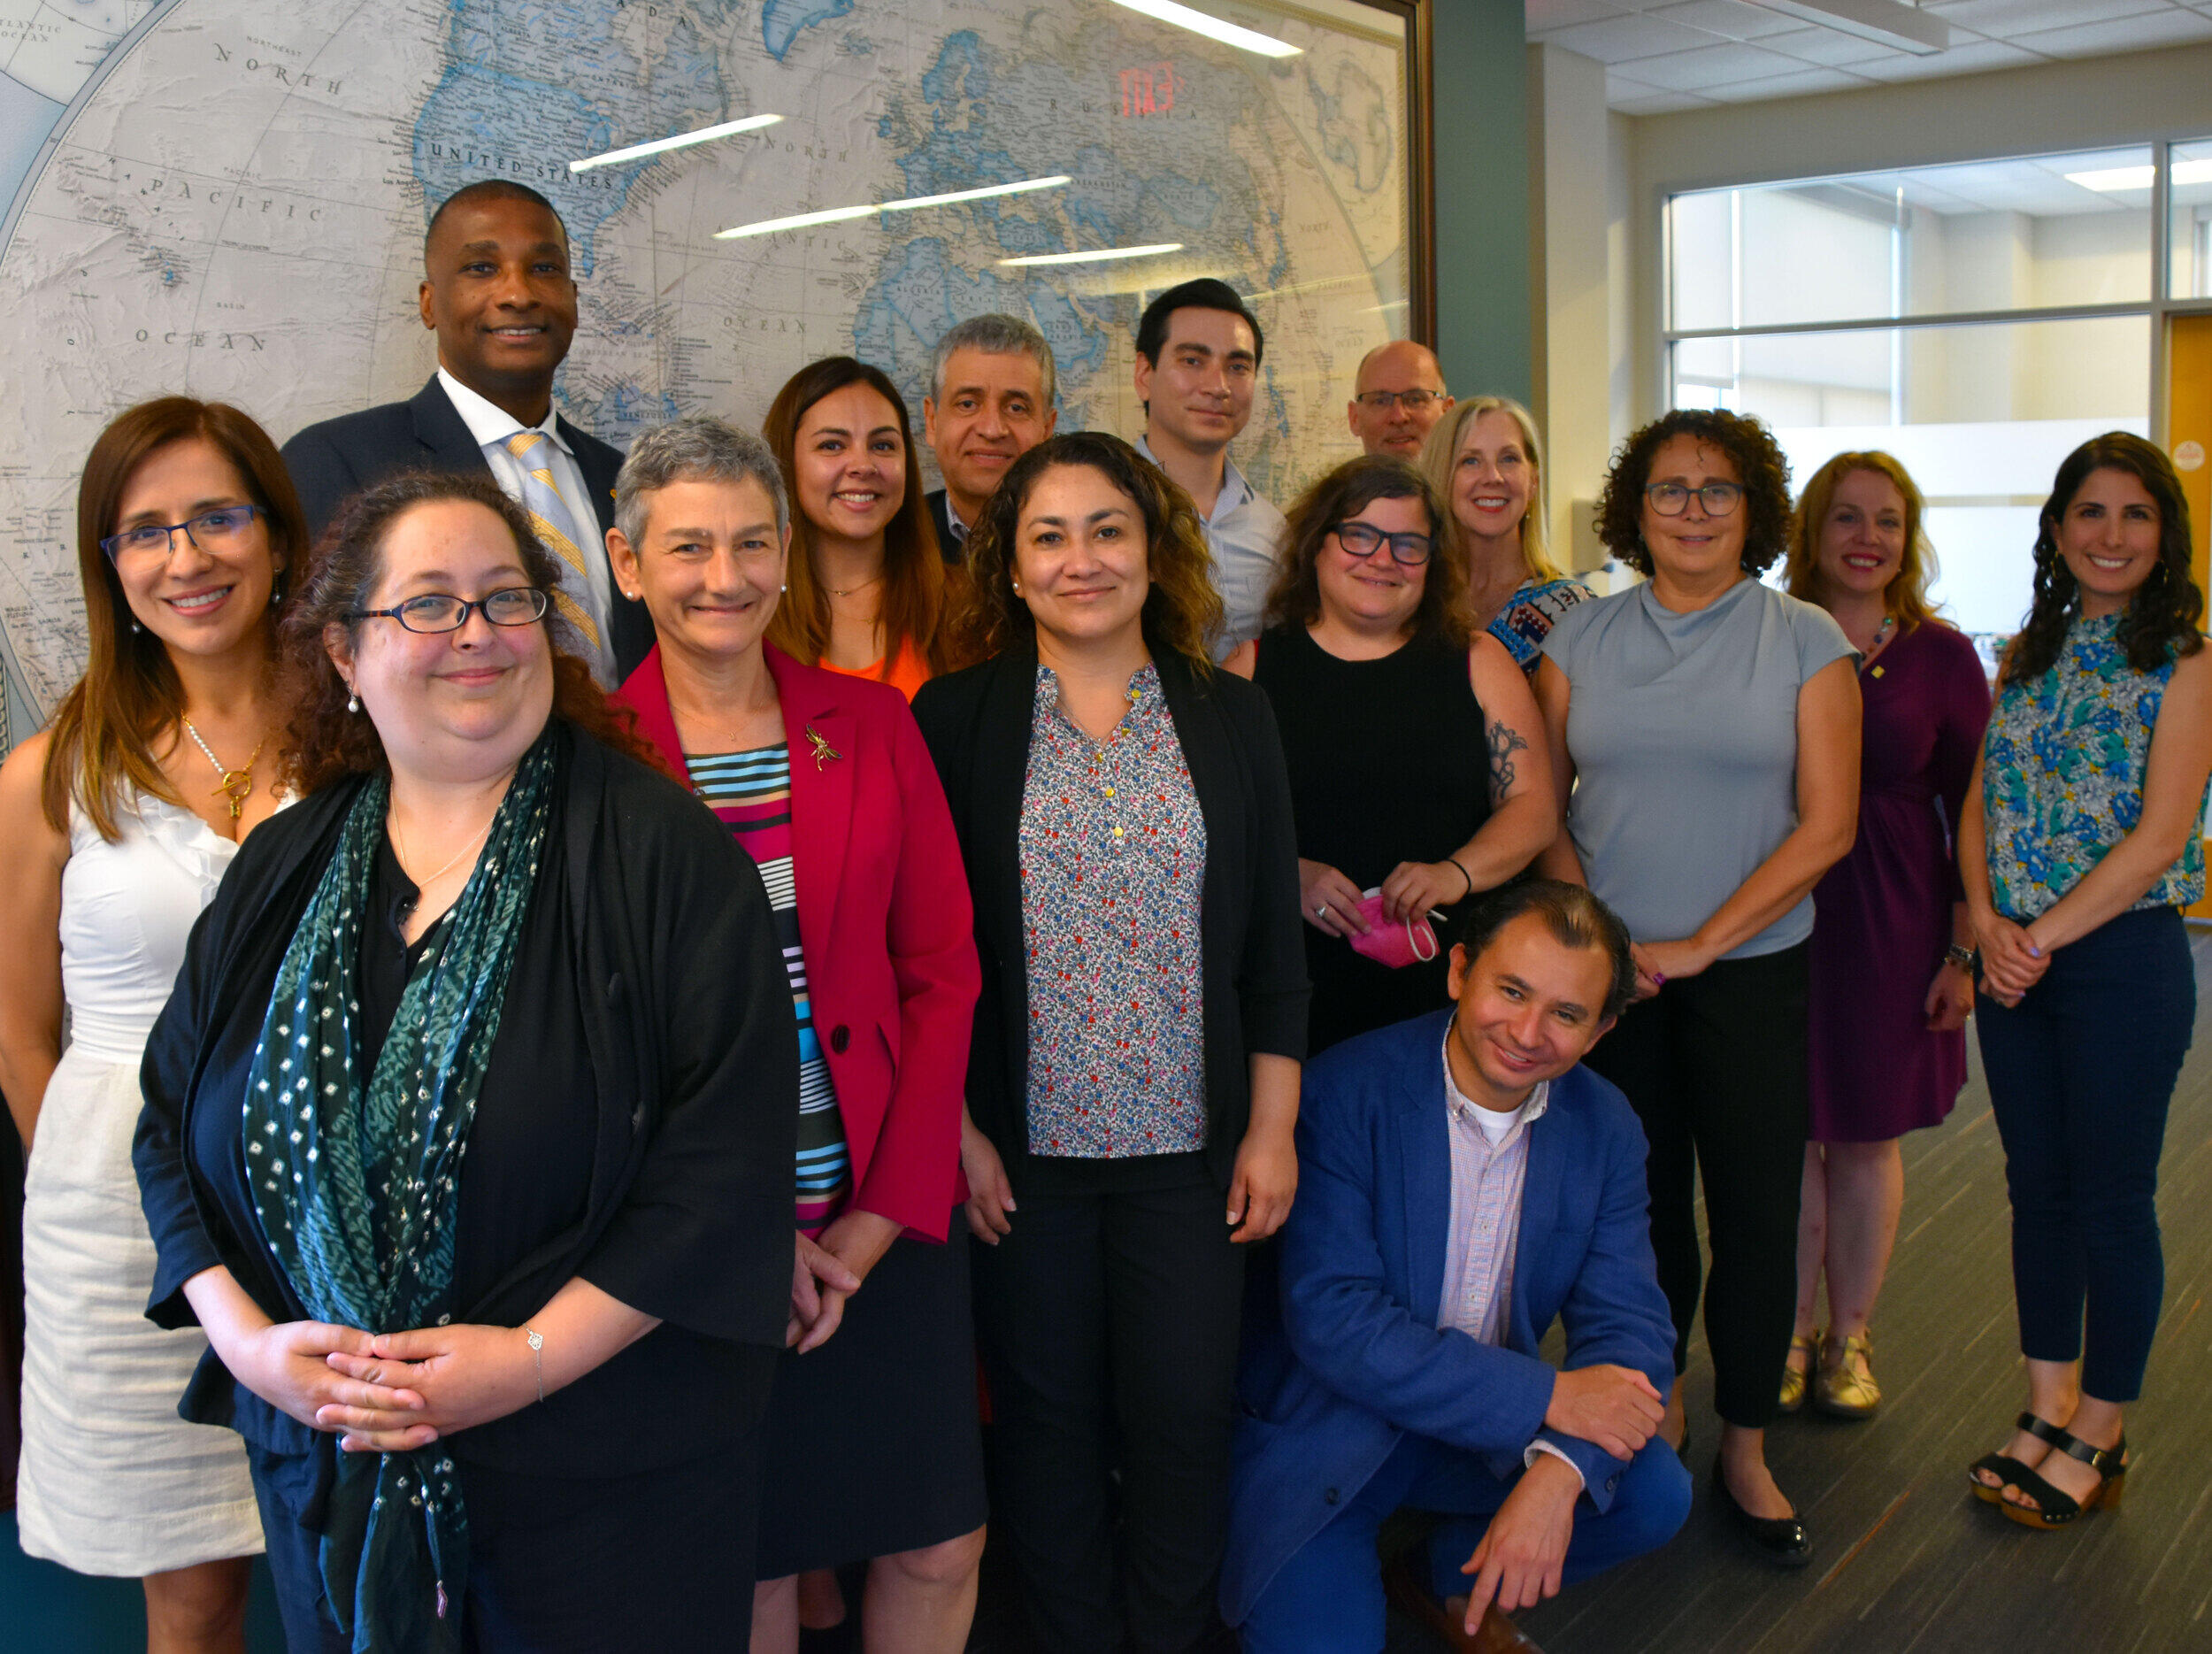 A group photo of delegates, faculty from the VCU College of Humanities and Sciences, VCU’s Graduate School and Global Education Office staff